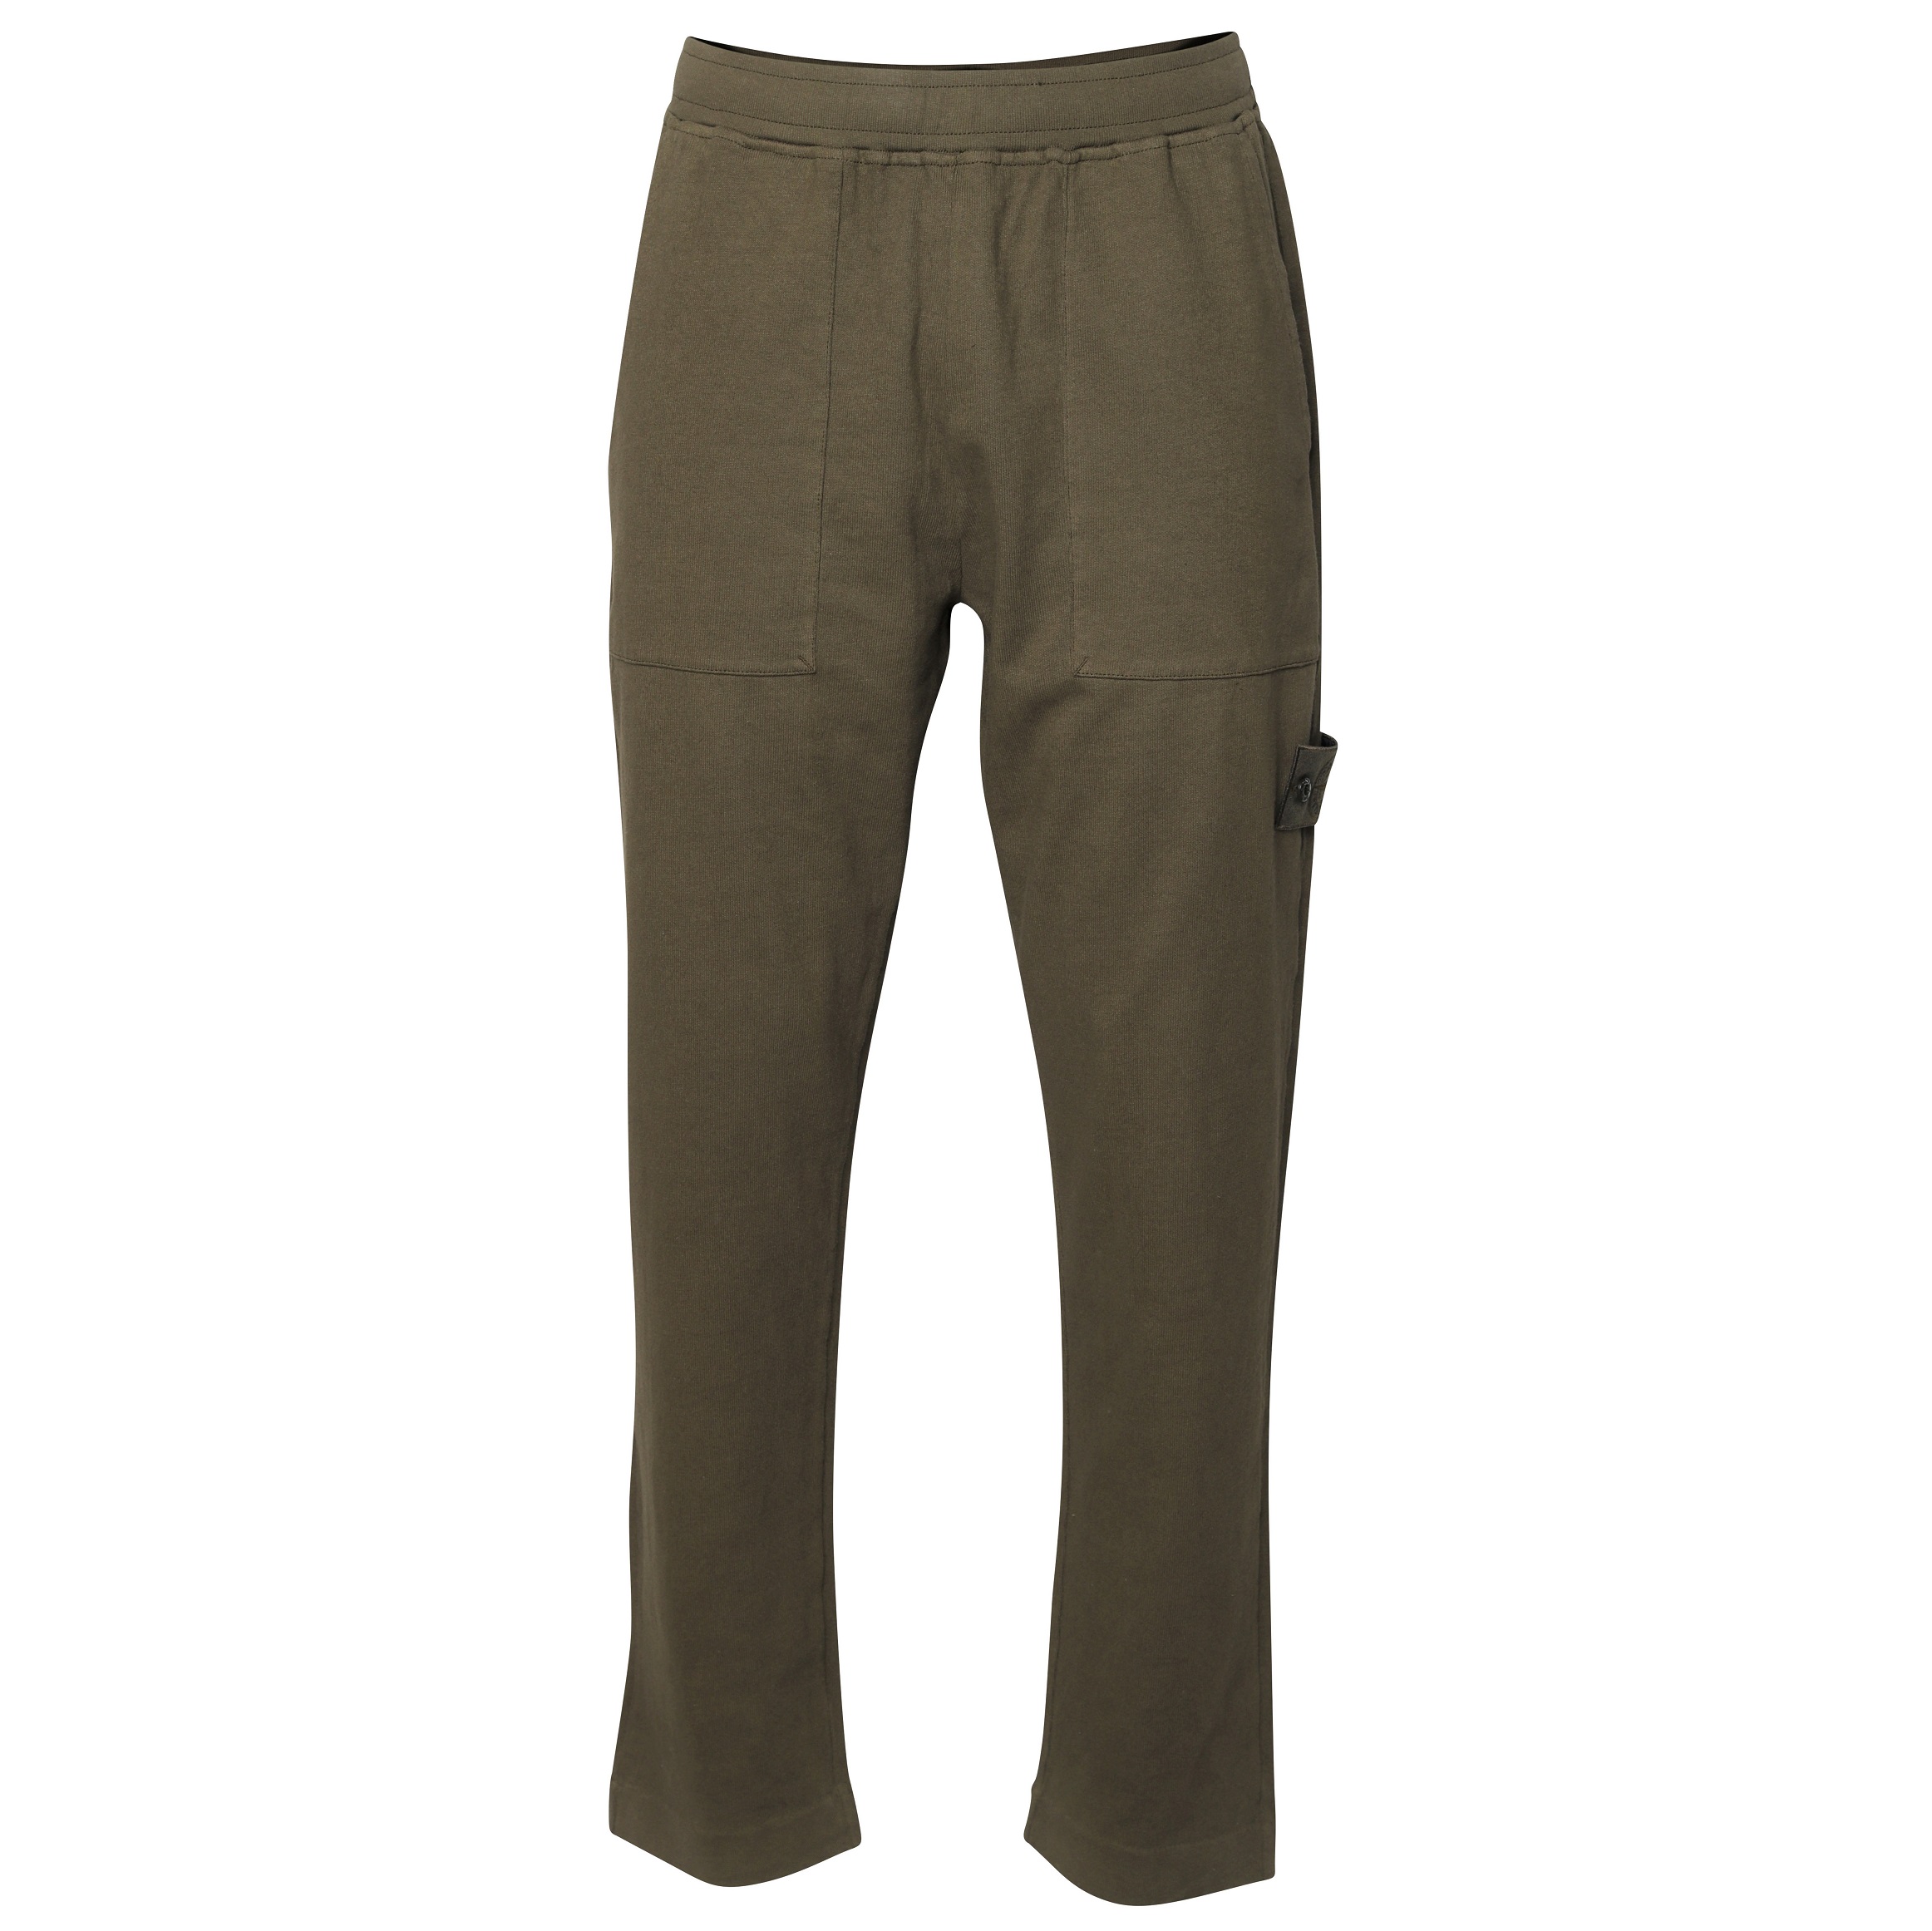 Stone Island Ghost Light Sweatpant in Military Green M